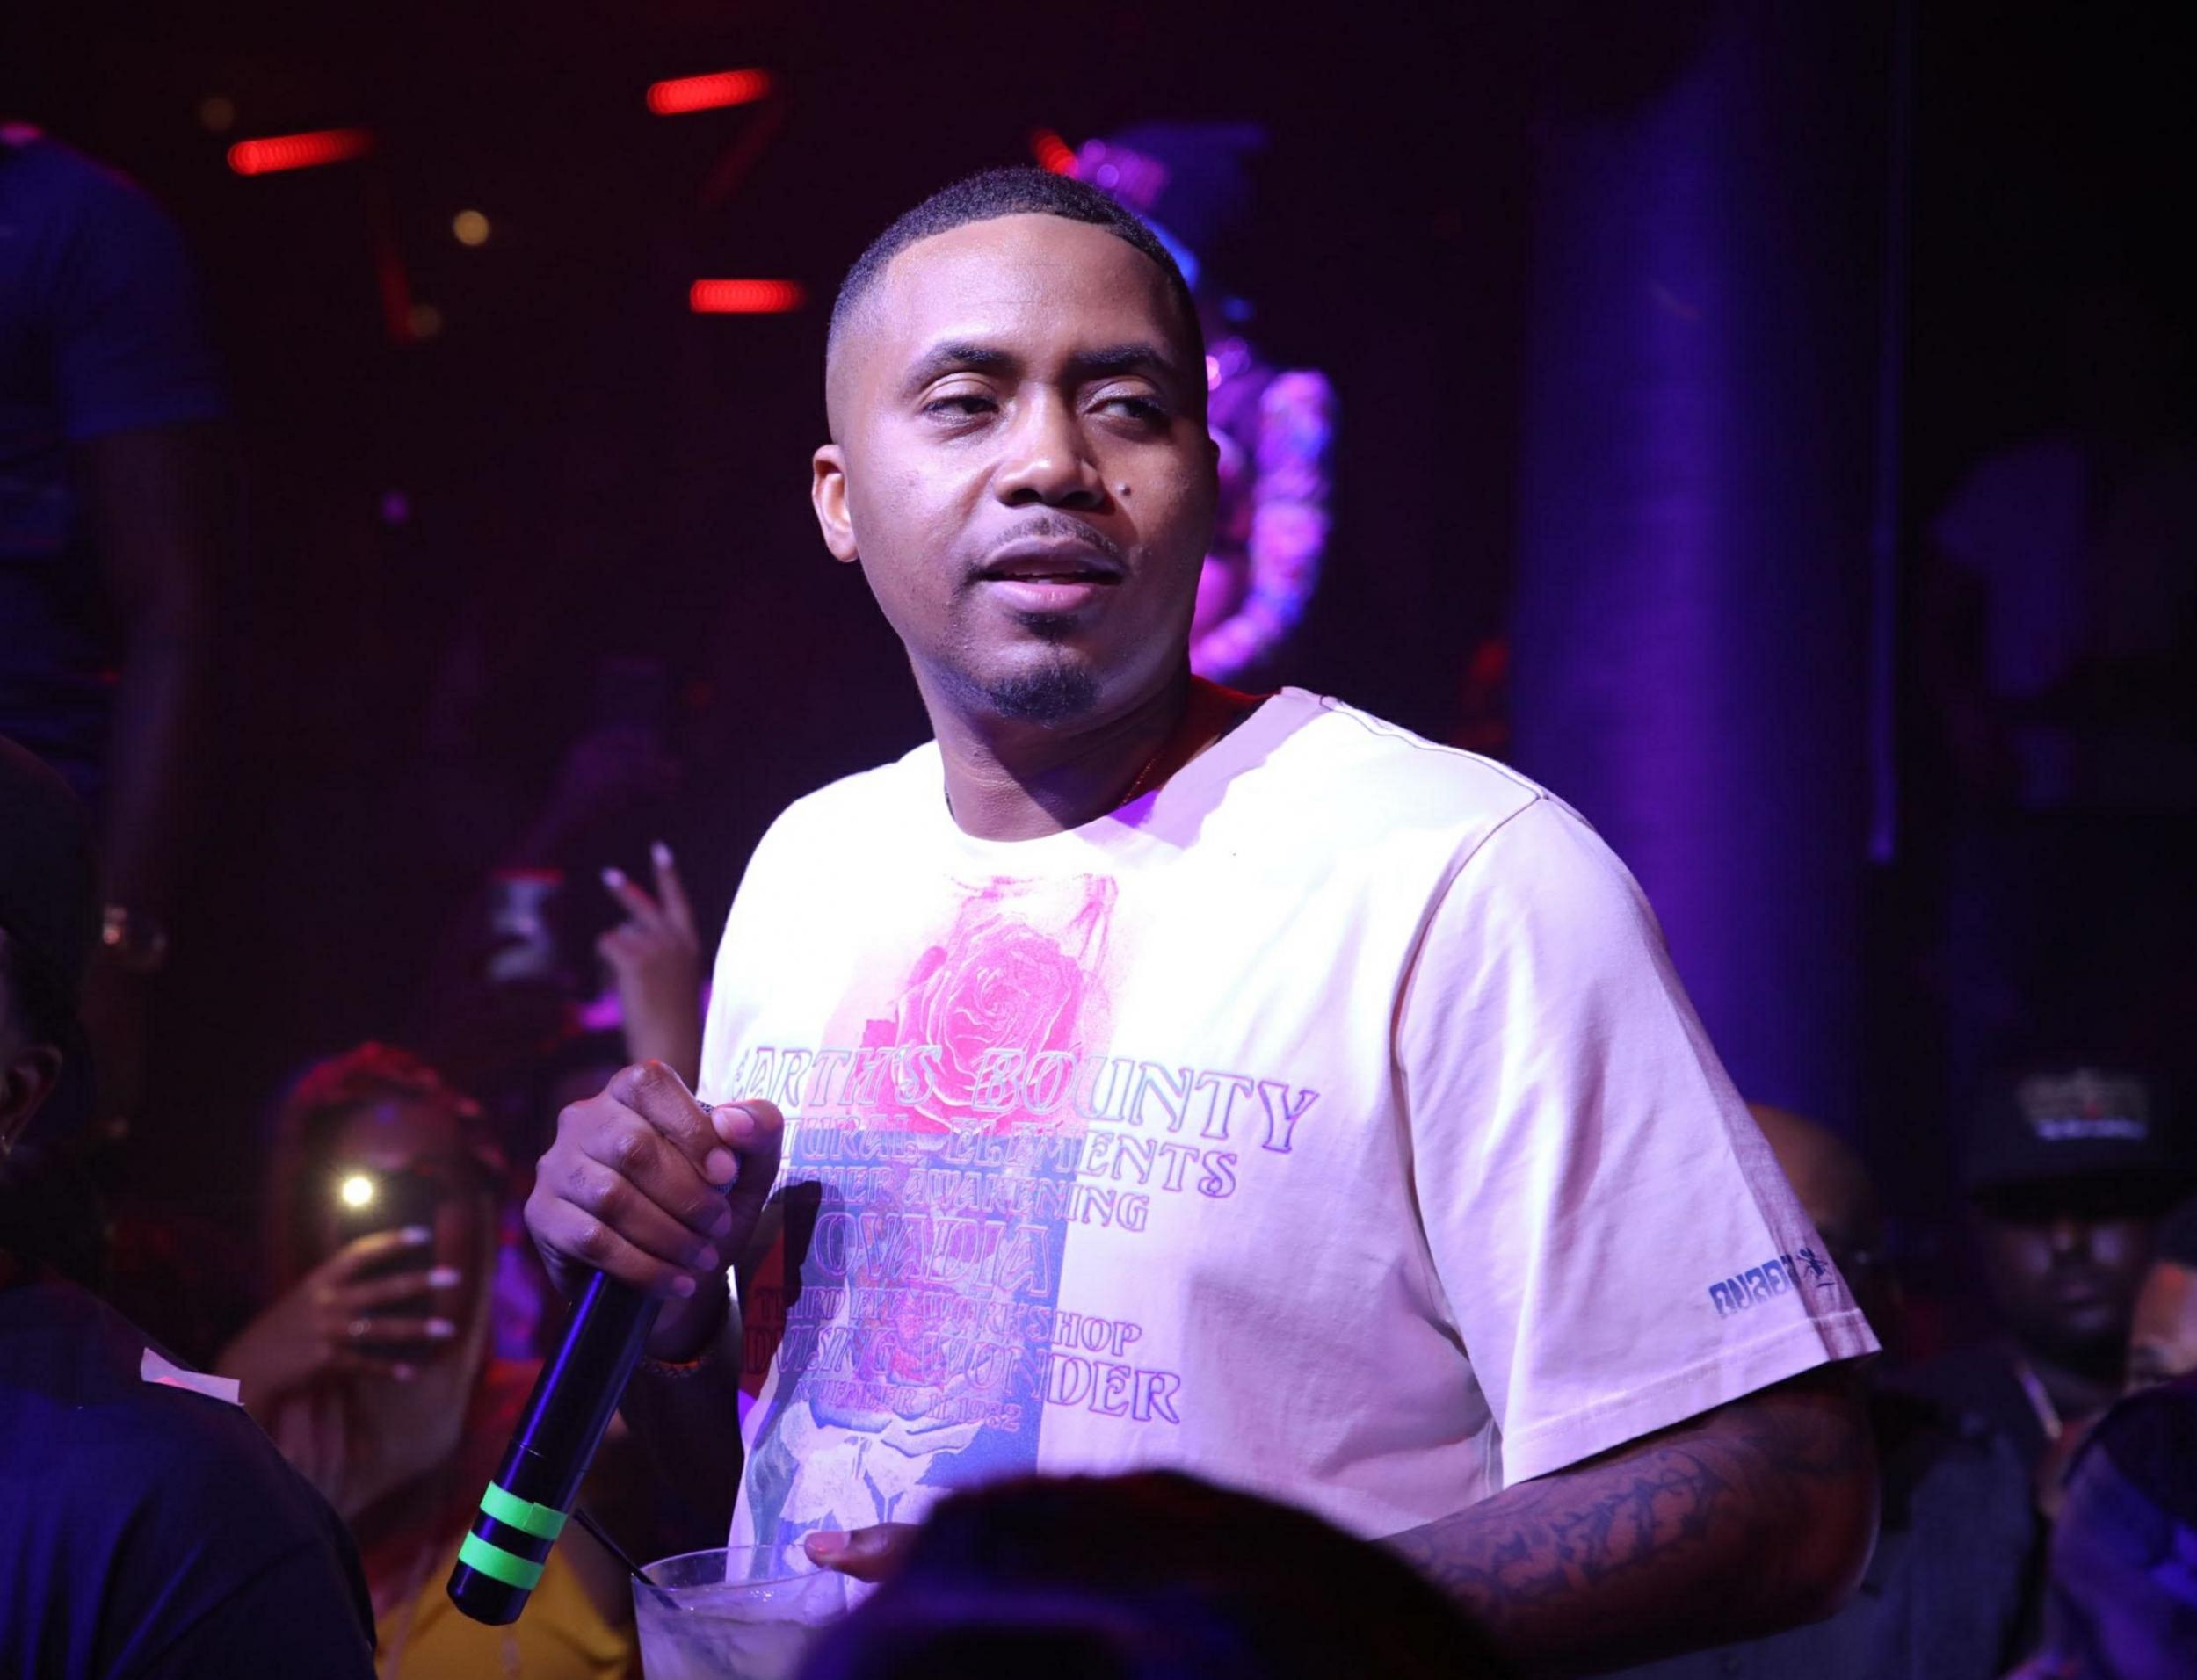 Nas at the opening gig of his co-tour with Mary J Blige, in West Palm Beach, Florida, on 11 July 2019